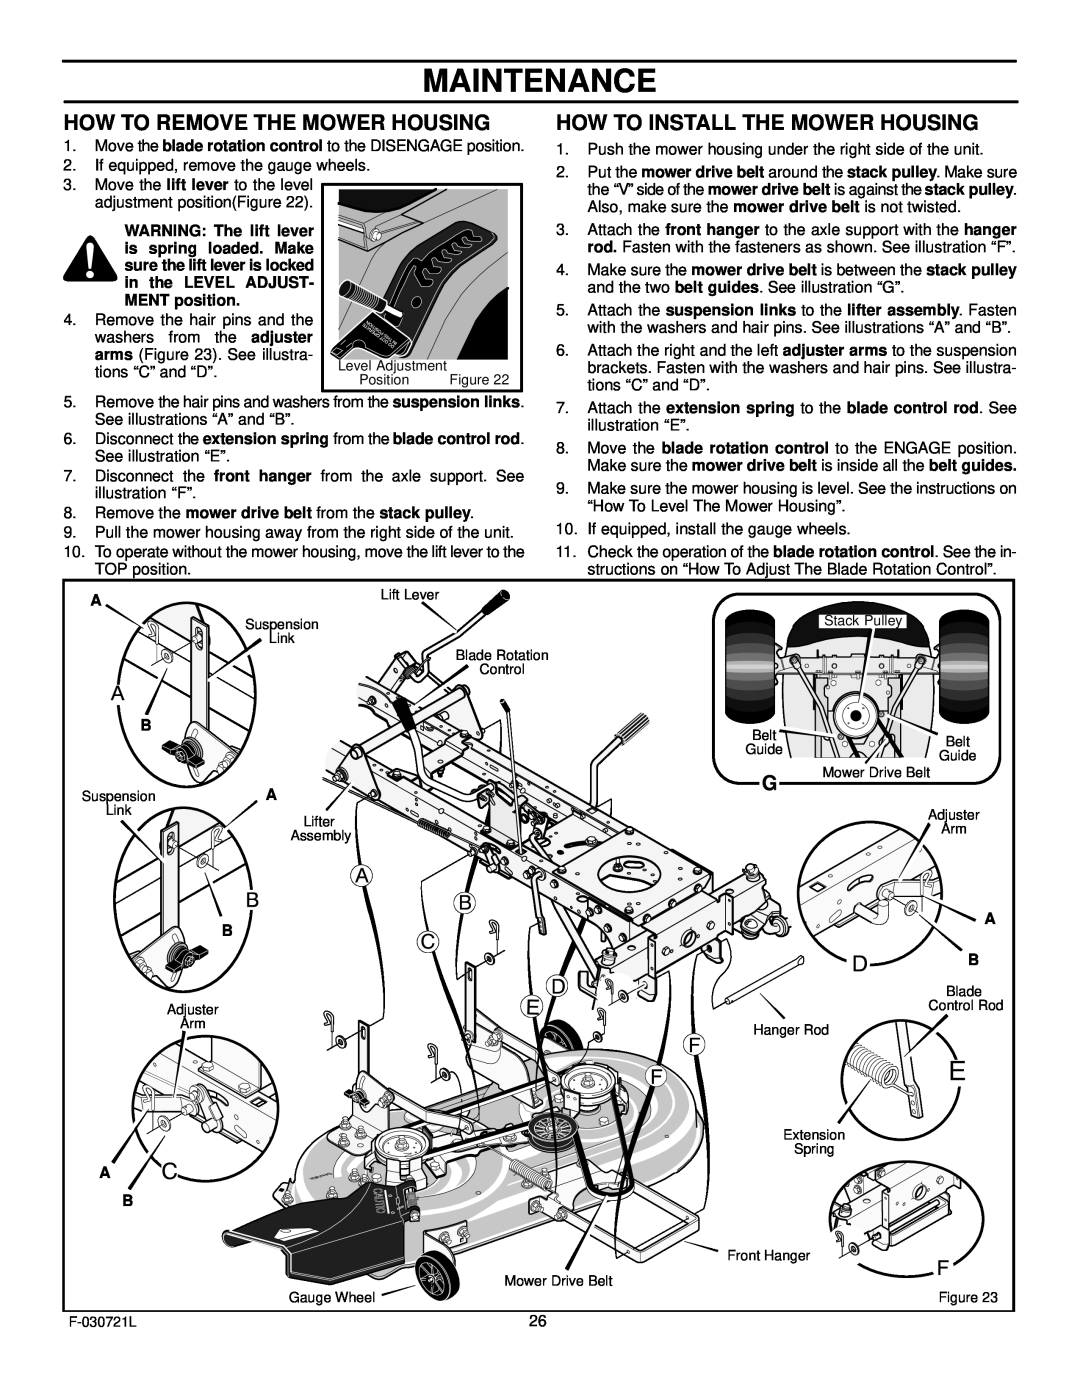 Murray 425007x92B manual Maintenance, How To Remove The Mower Housing, How To Install The Mower Housing 